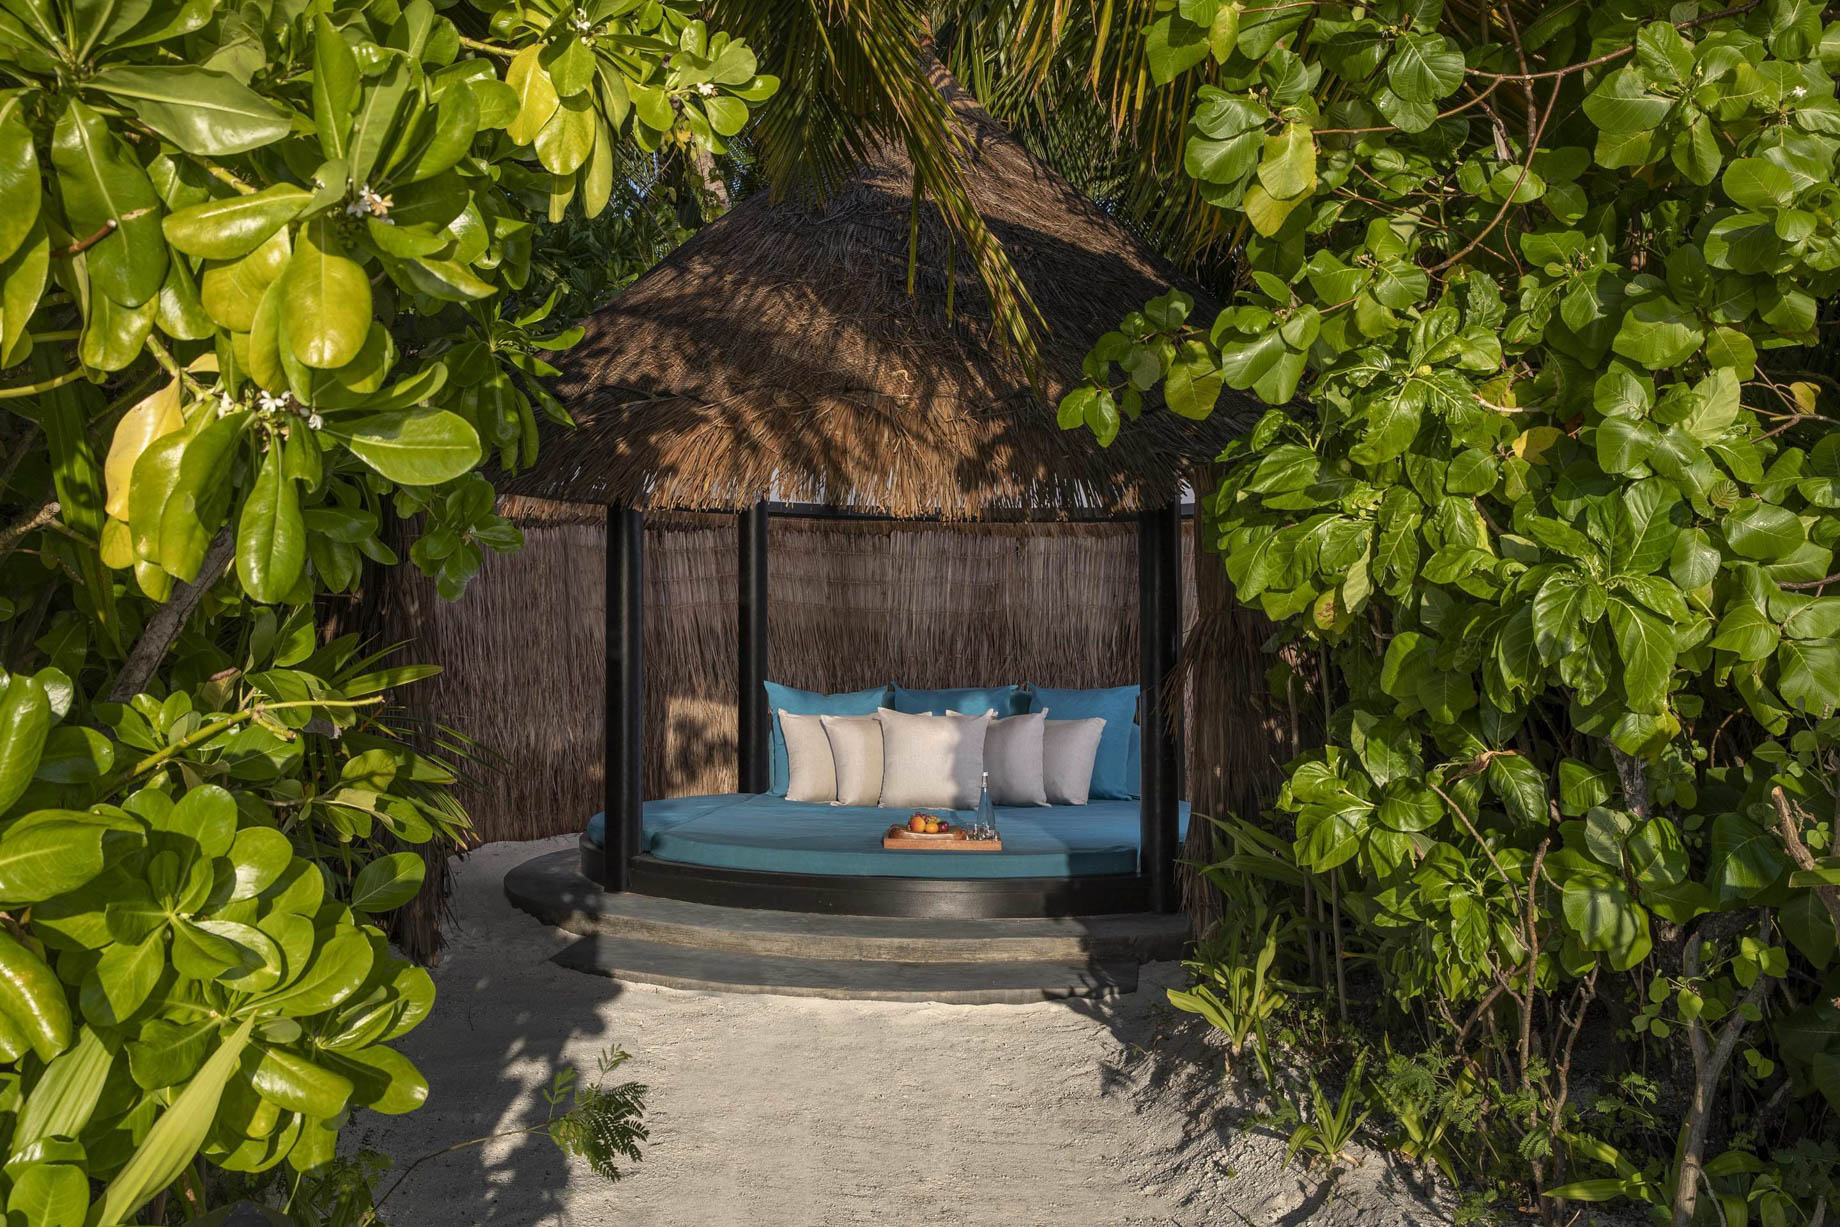 Naladhu Private Island Maldives Resort – South Male Atoll, Maldives – Ocean House with Pool and Private Beach Cabana